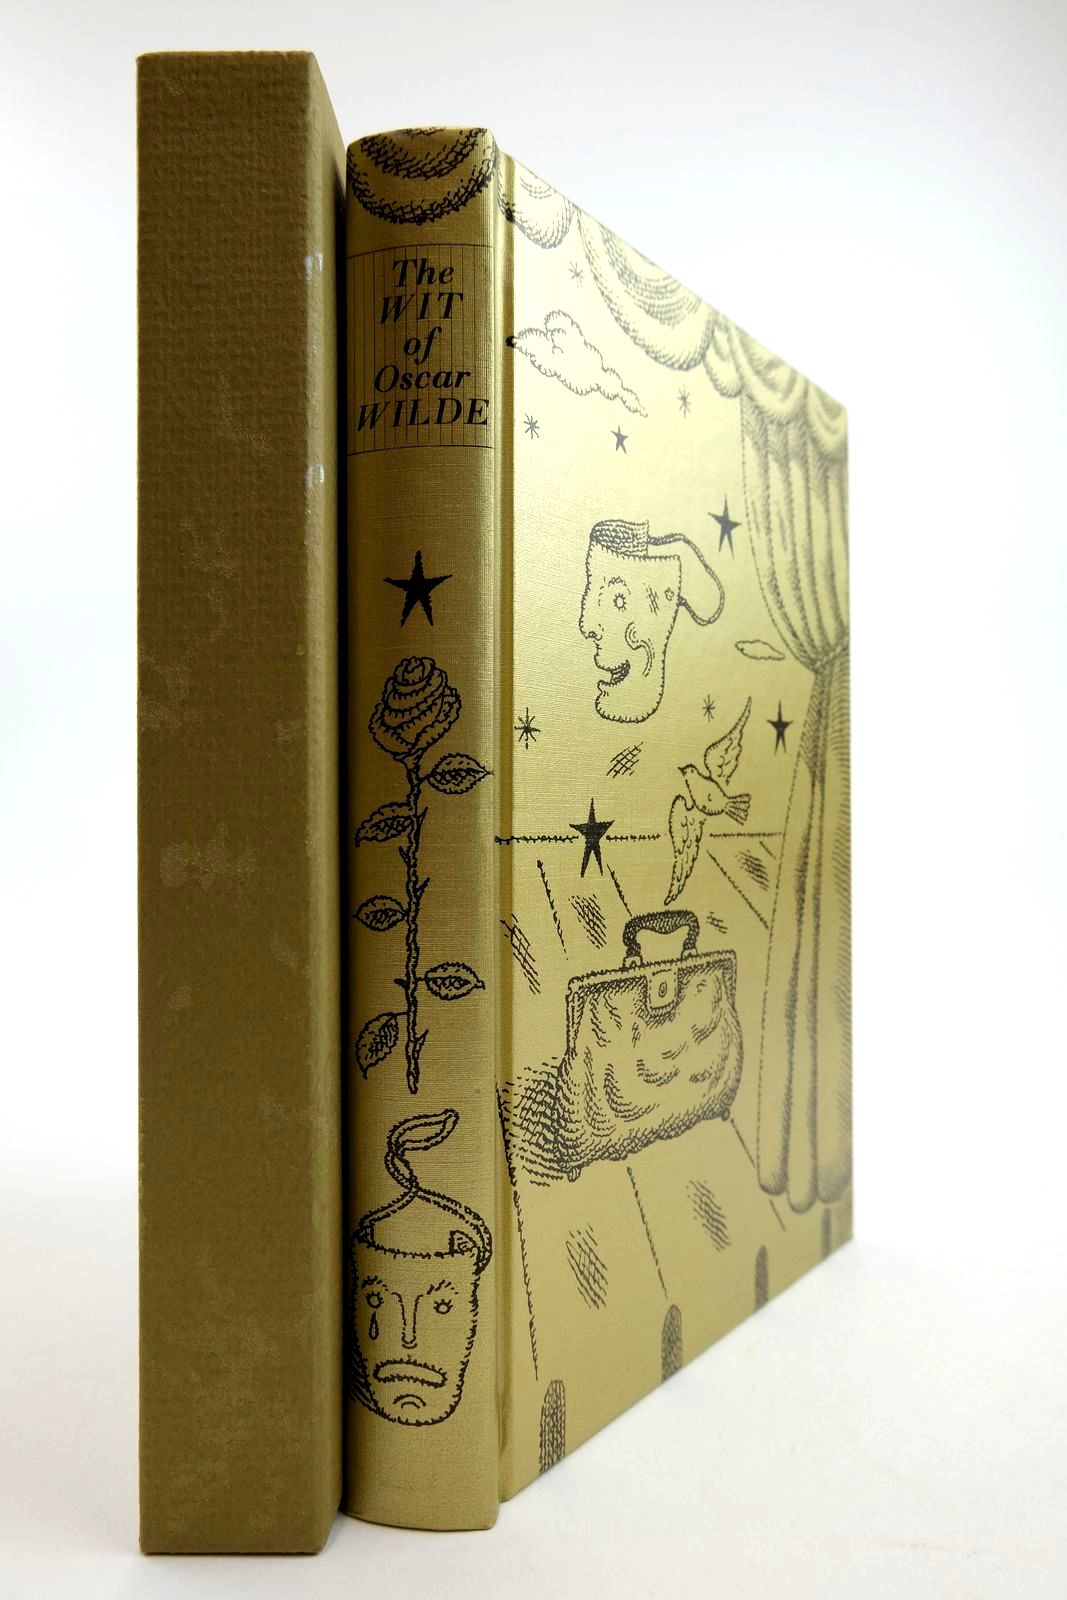 Photo of THE WIT OF OSCAR WILDE written by Wilde, Oscar illustrated by Beck, Ian Archie published by Folio Society (STOCK CODE: 2134271)  for sale by Stella & Rose's Books